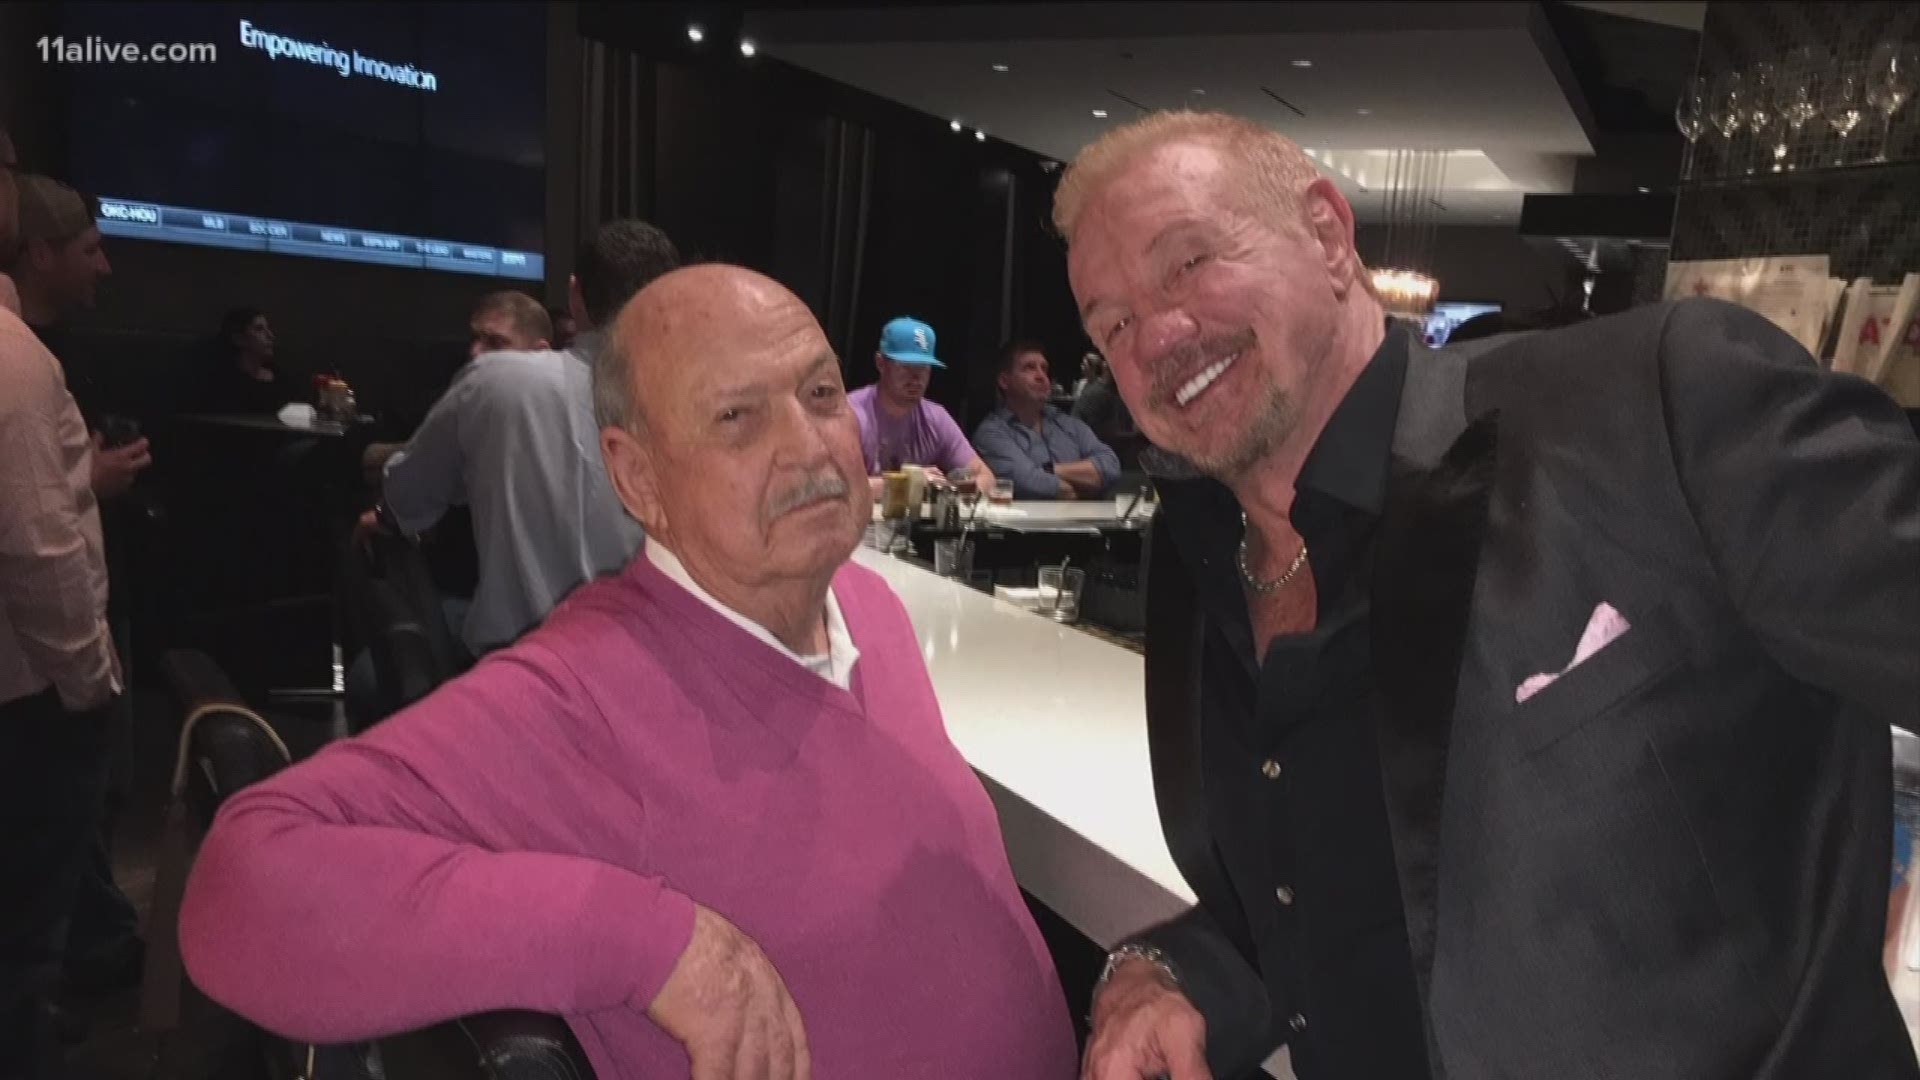 Diamond Dallas Page, a close friend of "Mean Gene," remembered the late WWE Hall of Famer.